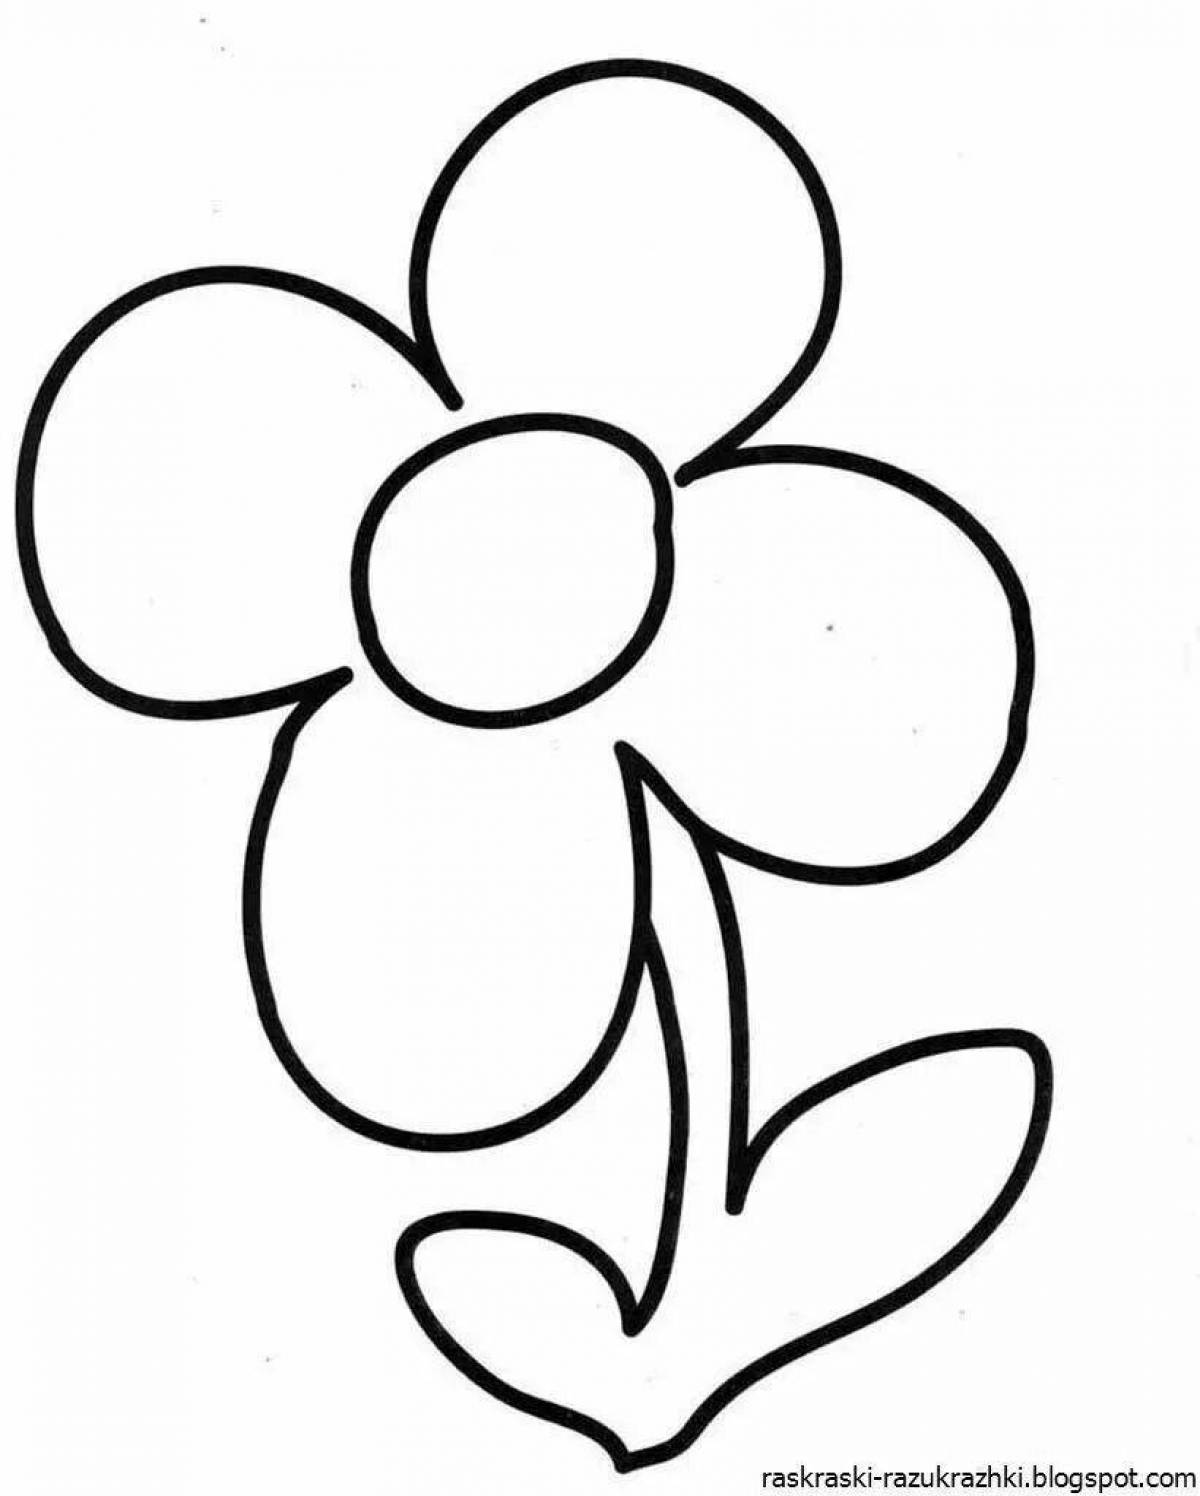 Great flower coloring book for 3-4 year olds